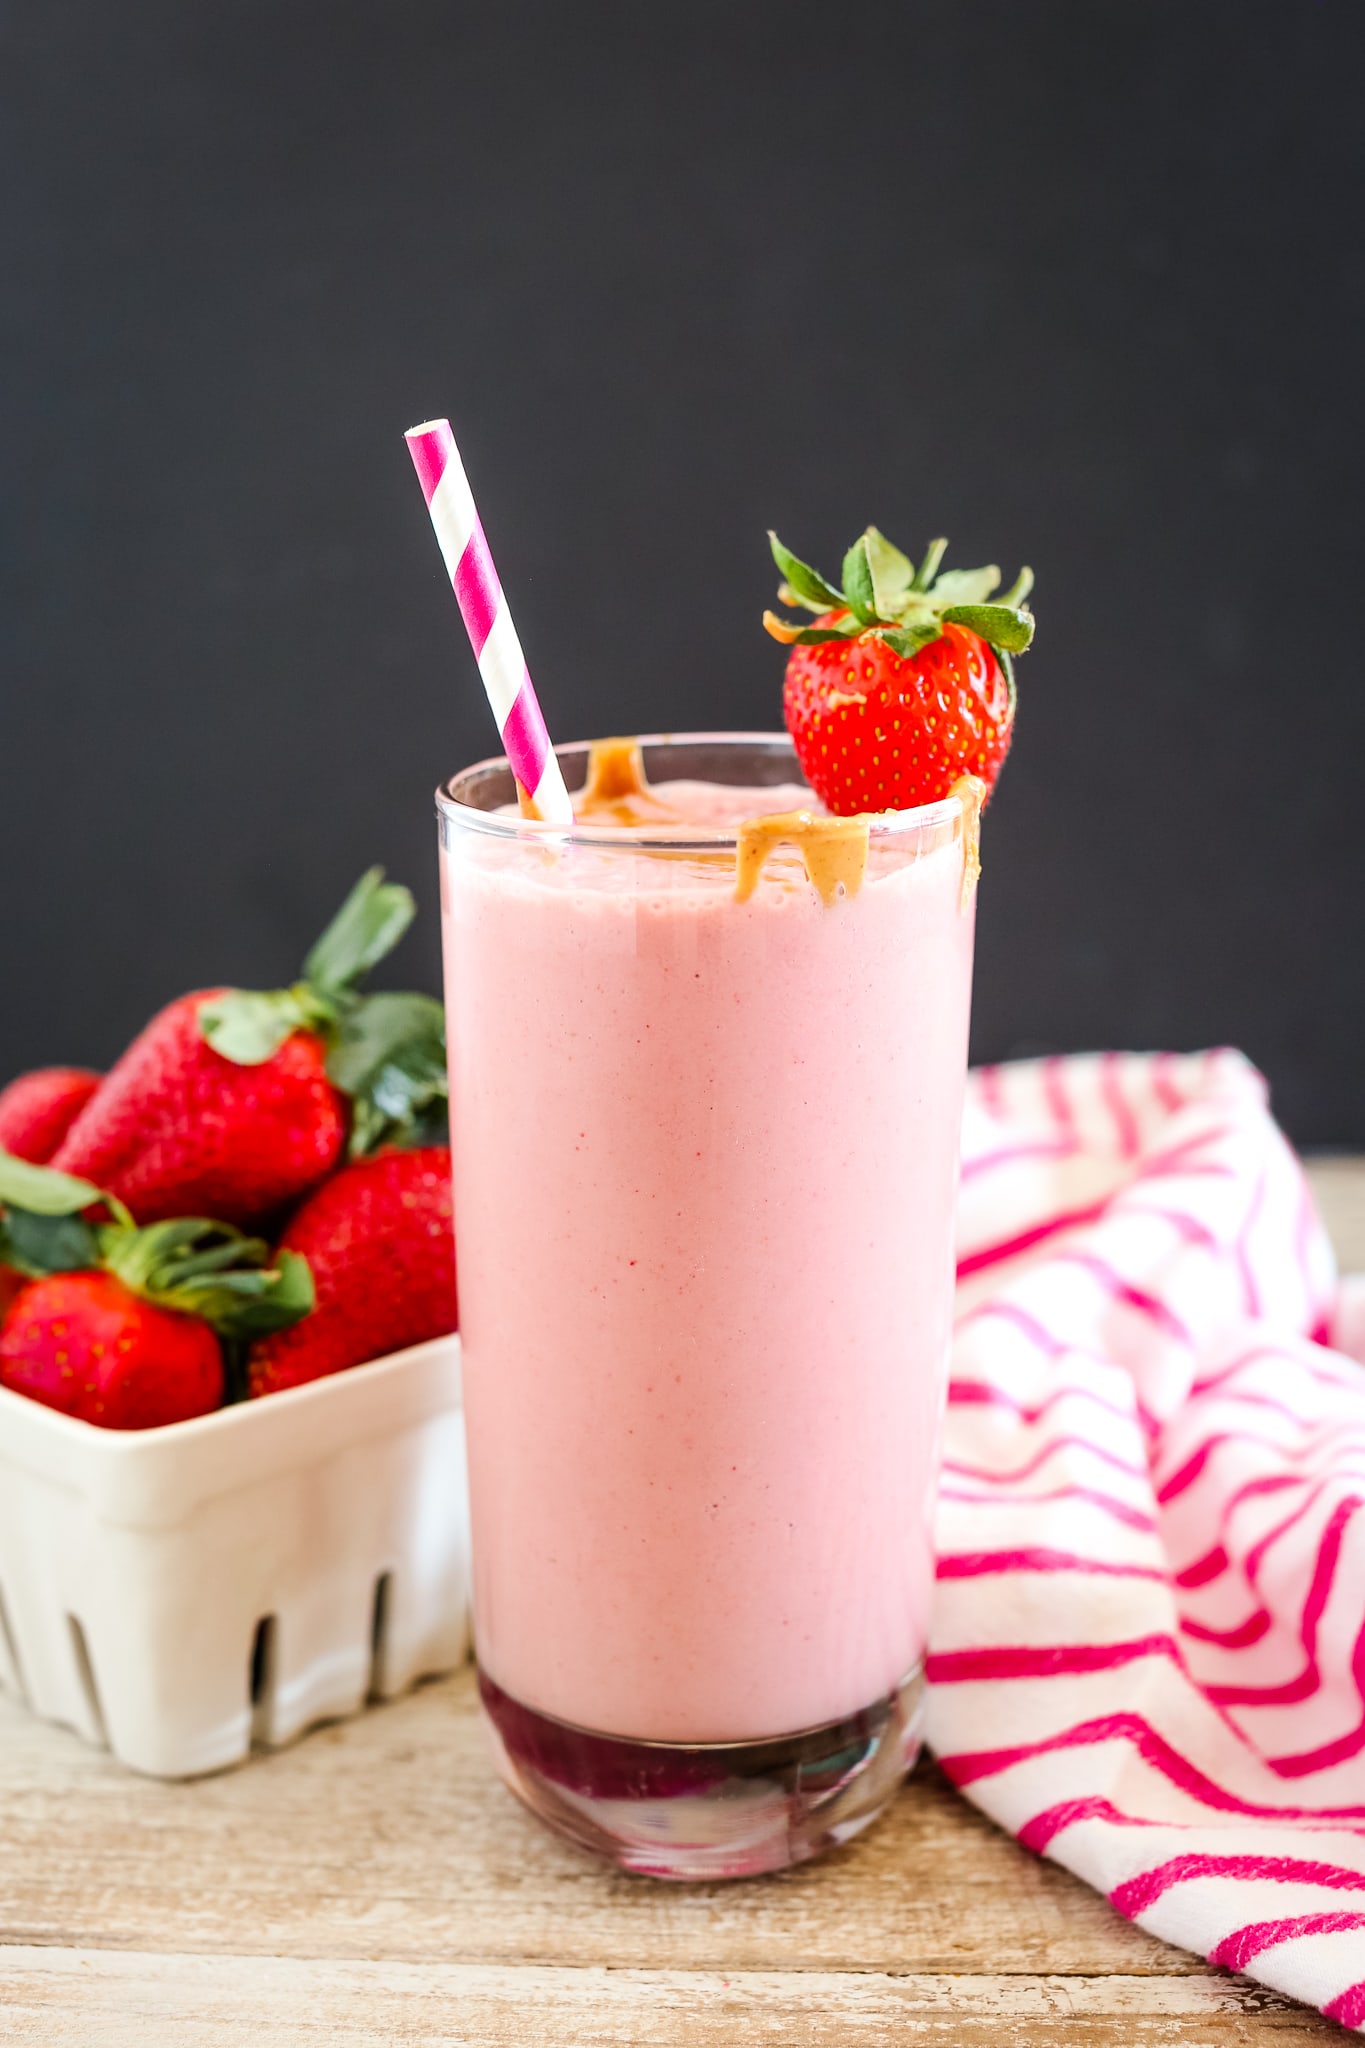 Strawberry Peanut Butter Smoothie recipe in a tall glass with a red and and white striped straw and a strawberry garnish